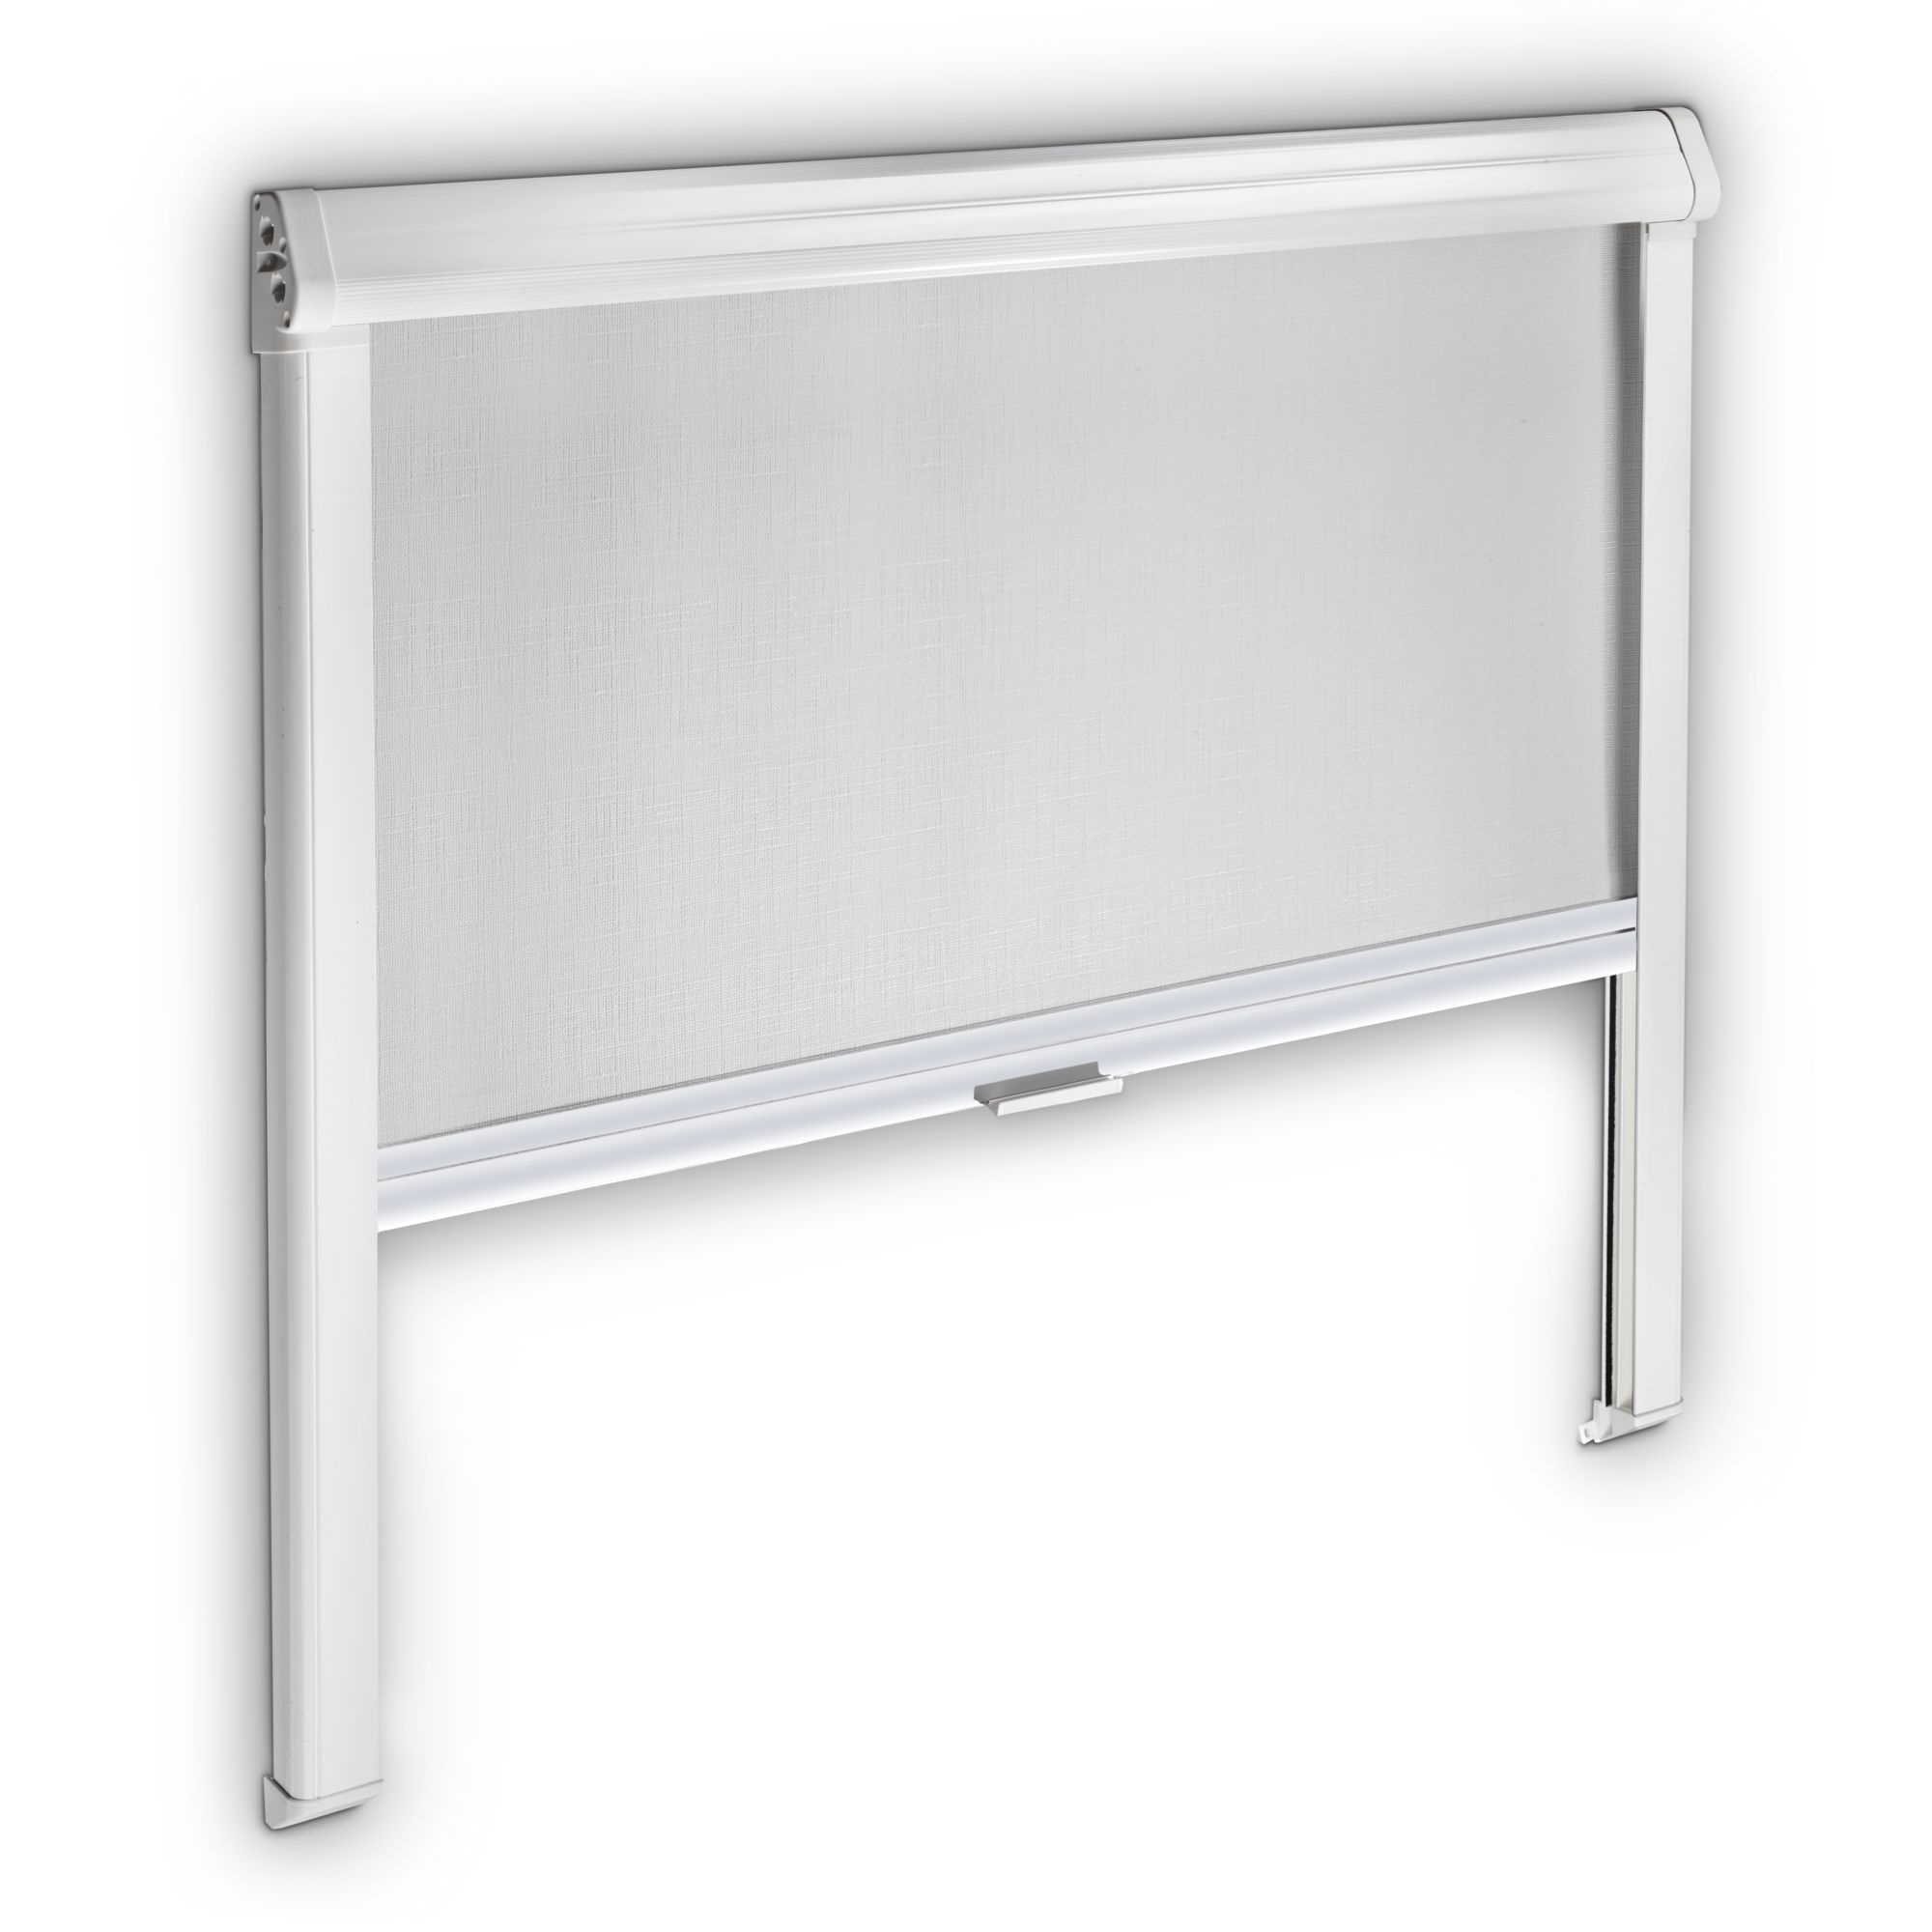 Dometic Black-Out Roller Blind 3000, 1510 x 810 mm, traffic-white